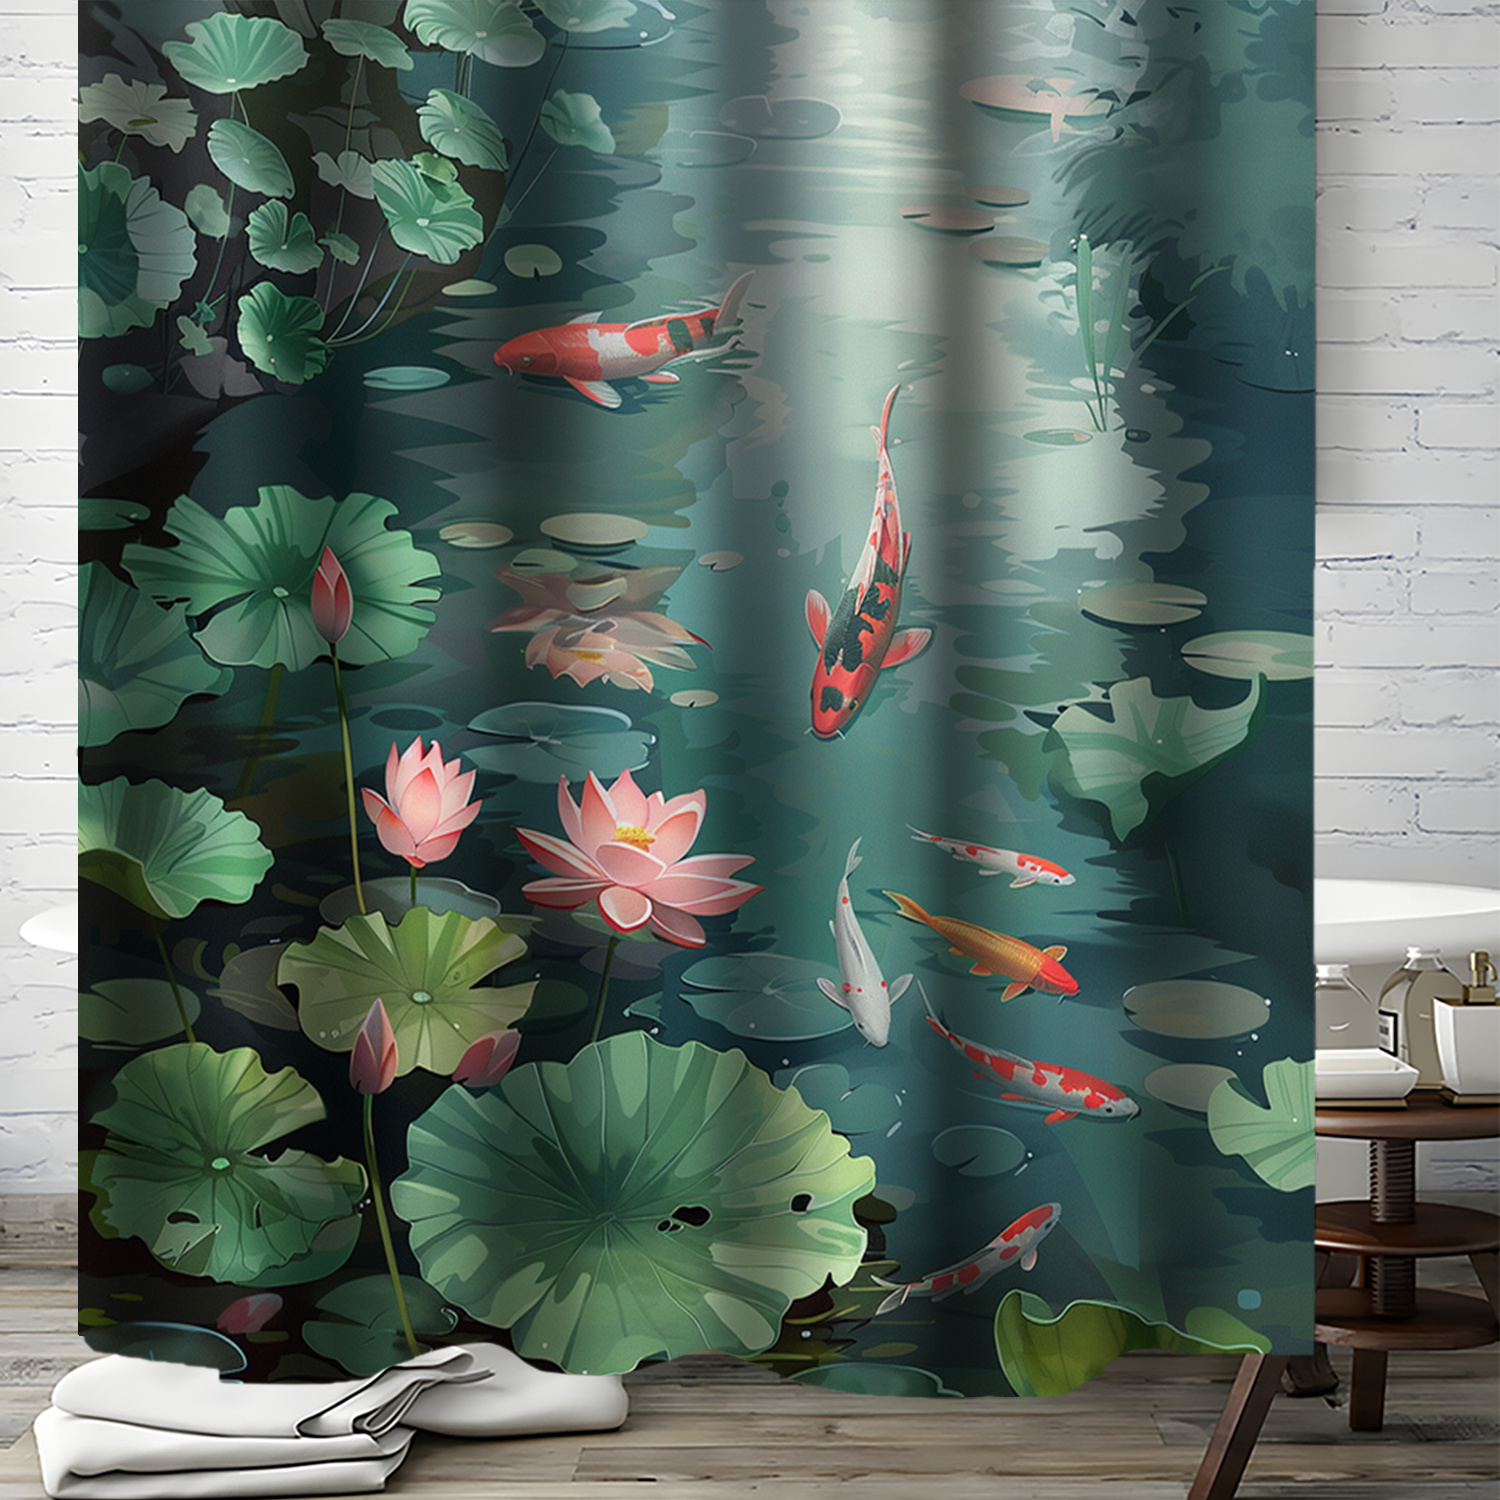 

Water-resistant Polyester Shower Curtain With Koi And Lotus Pond Design, Artistic Bathroom Decor With Hooks, Woven Weave, Non-bleachable, 71x71 Inches - 1 Piece